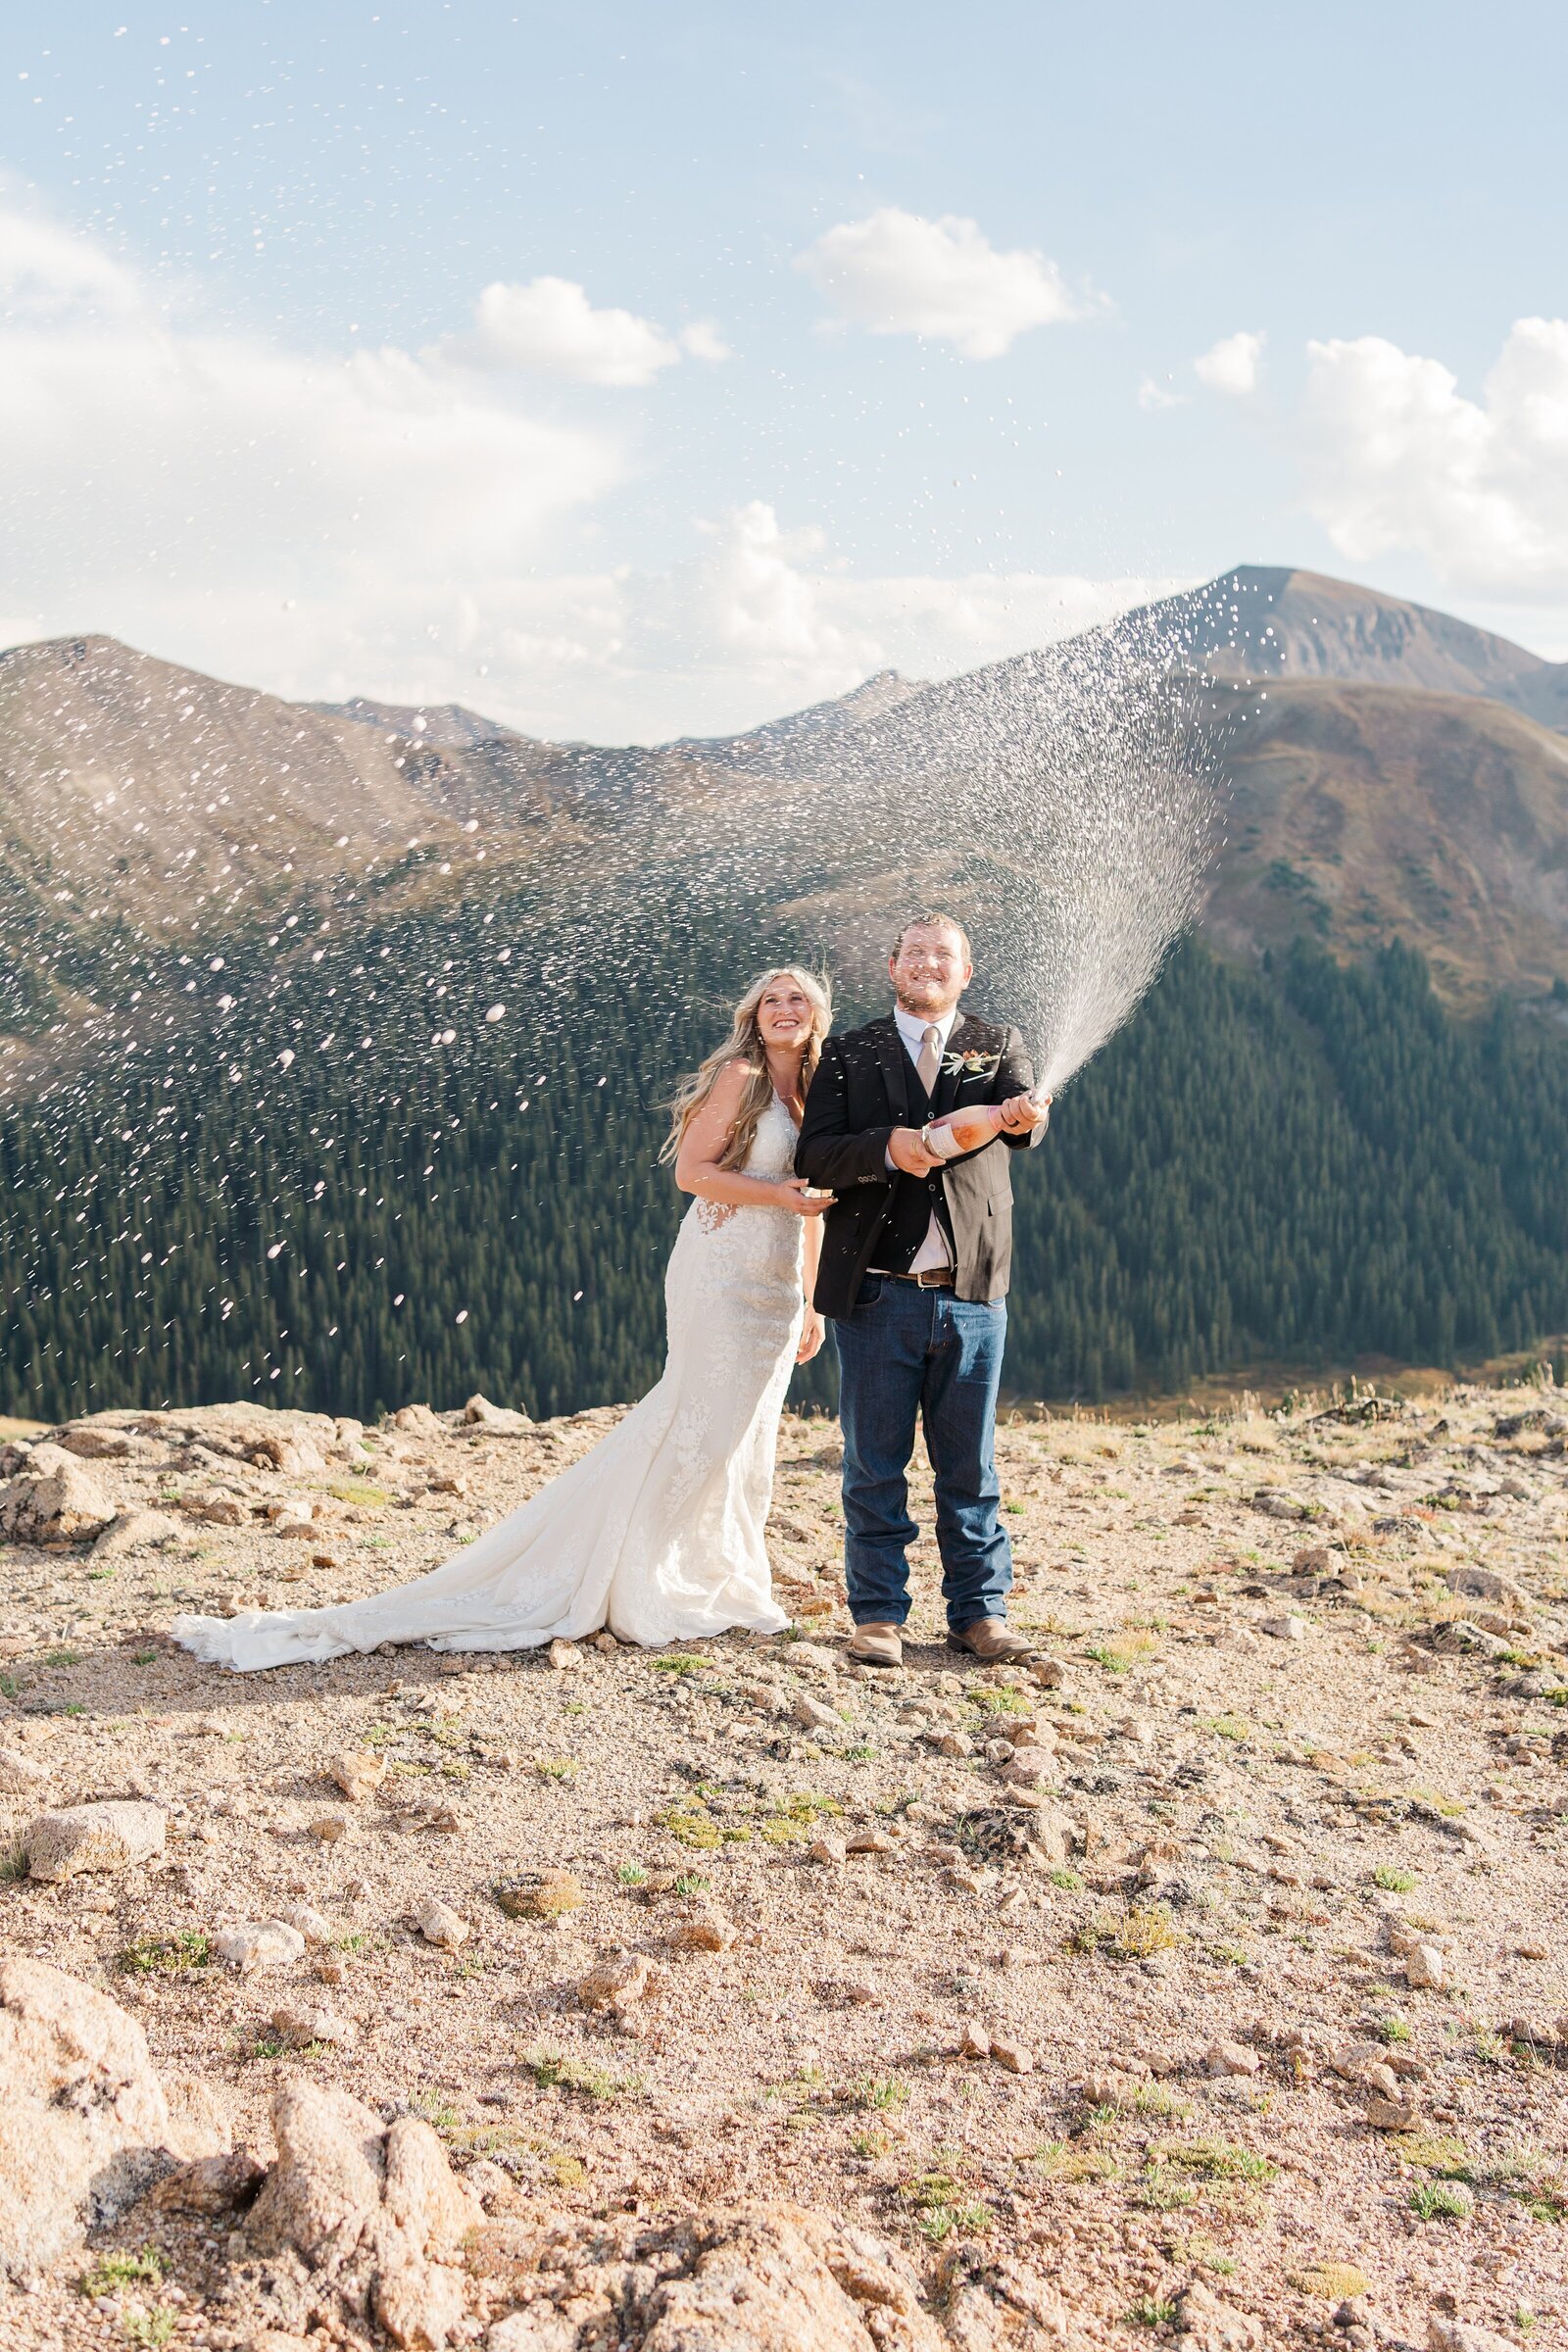 Embark on an unforgettable adventure elopement with Samantha Immer Photography. Our personalized and meaningful hiking elopement photography captures the beauty of the Rocky Mountains and your love story.